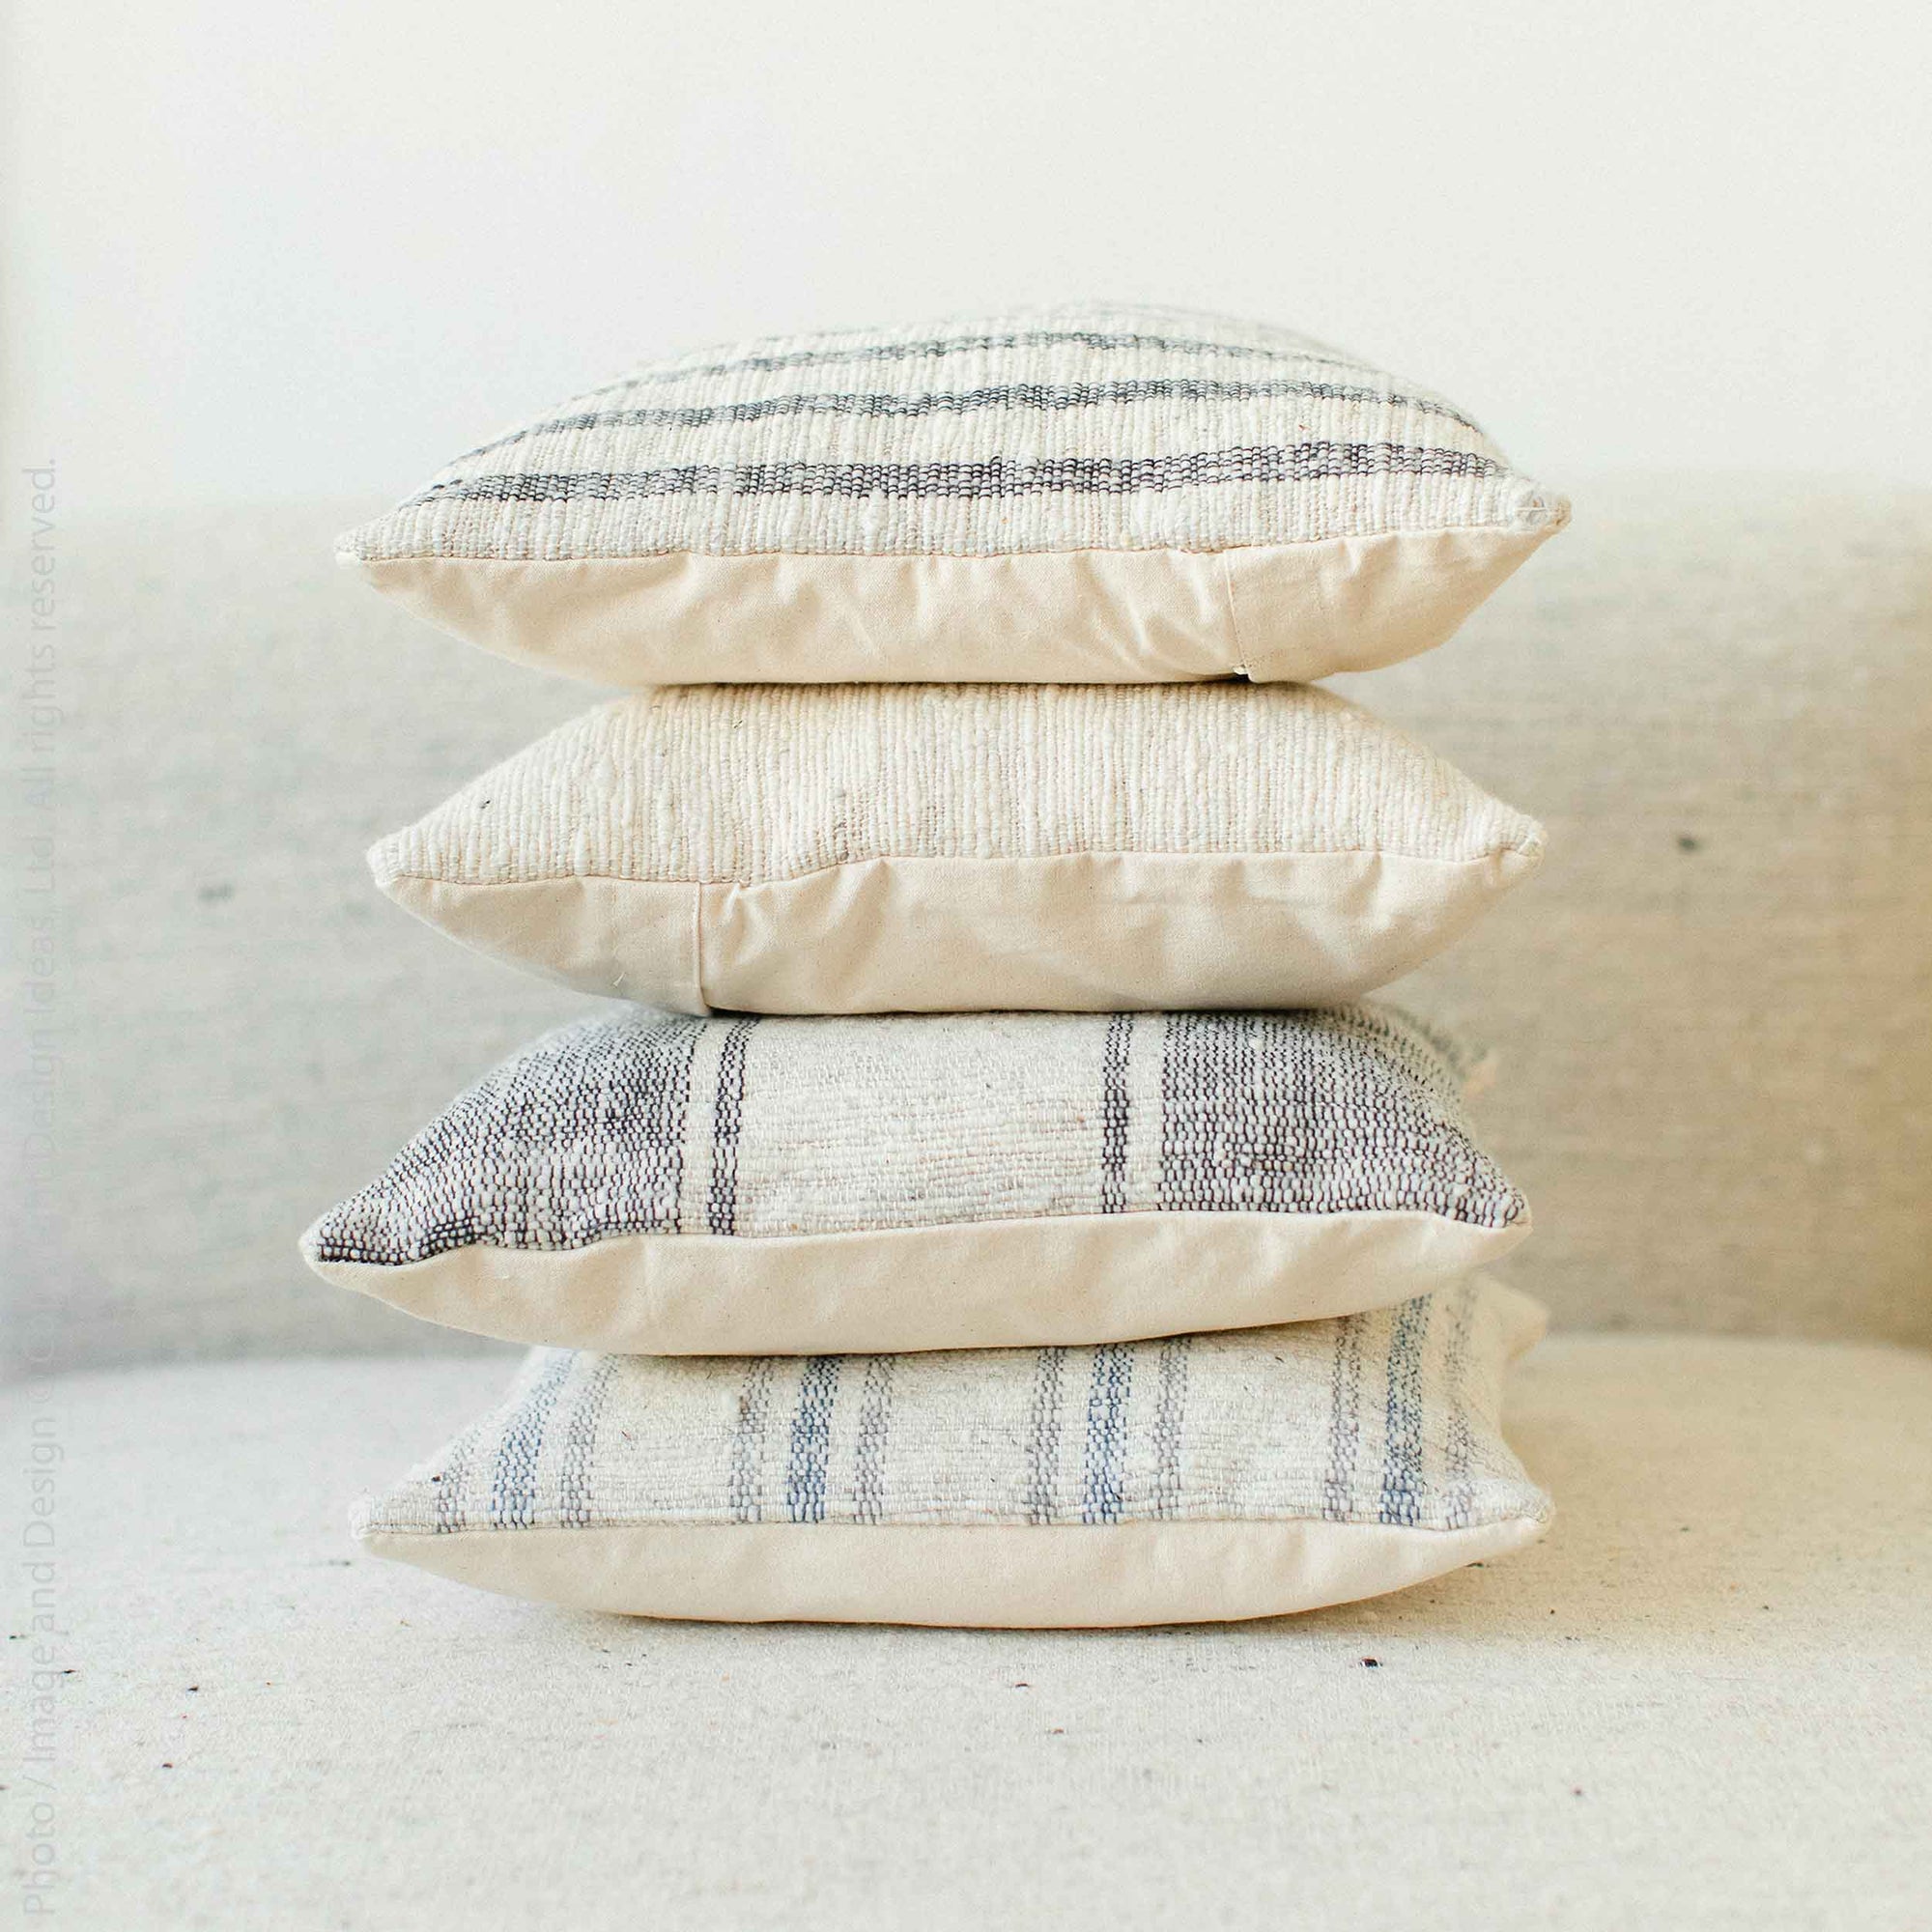 Holbeck™ Woven Cotton Cushion Cover (14x14 in)